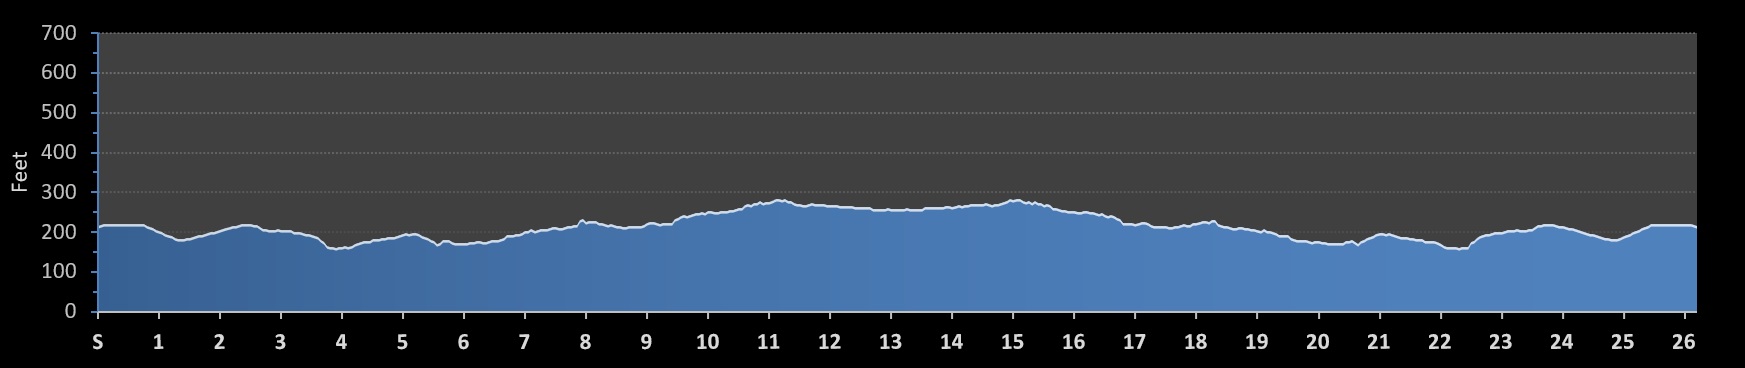 Hudson Valley Marathon at the Walkway Over the Hudson Elevation Profile